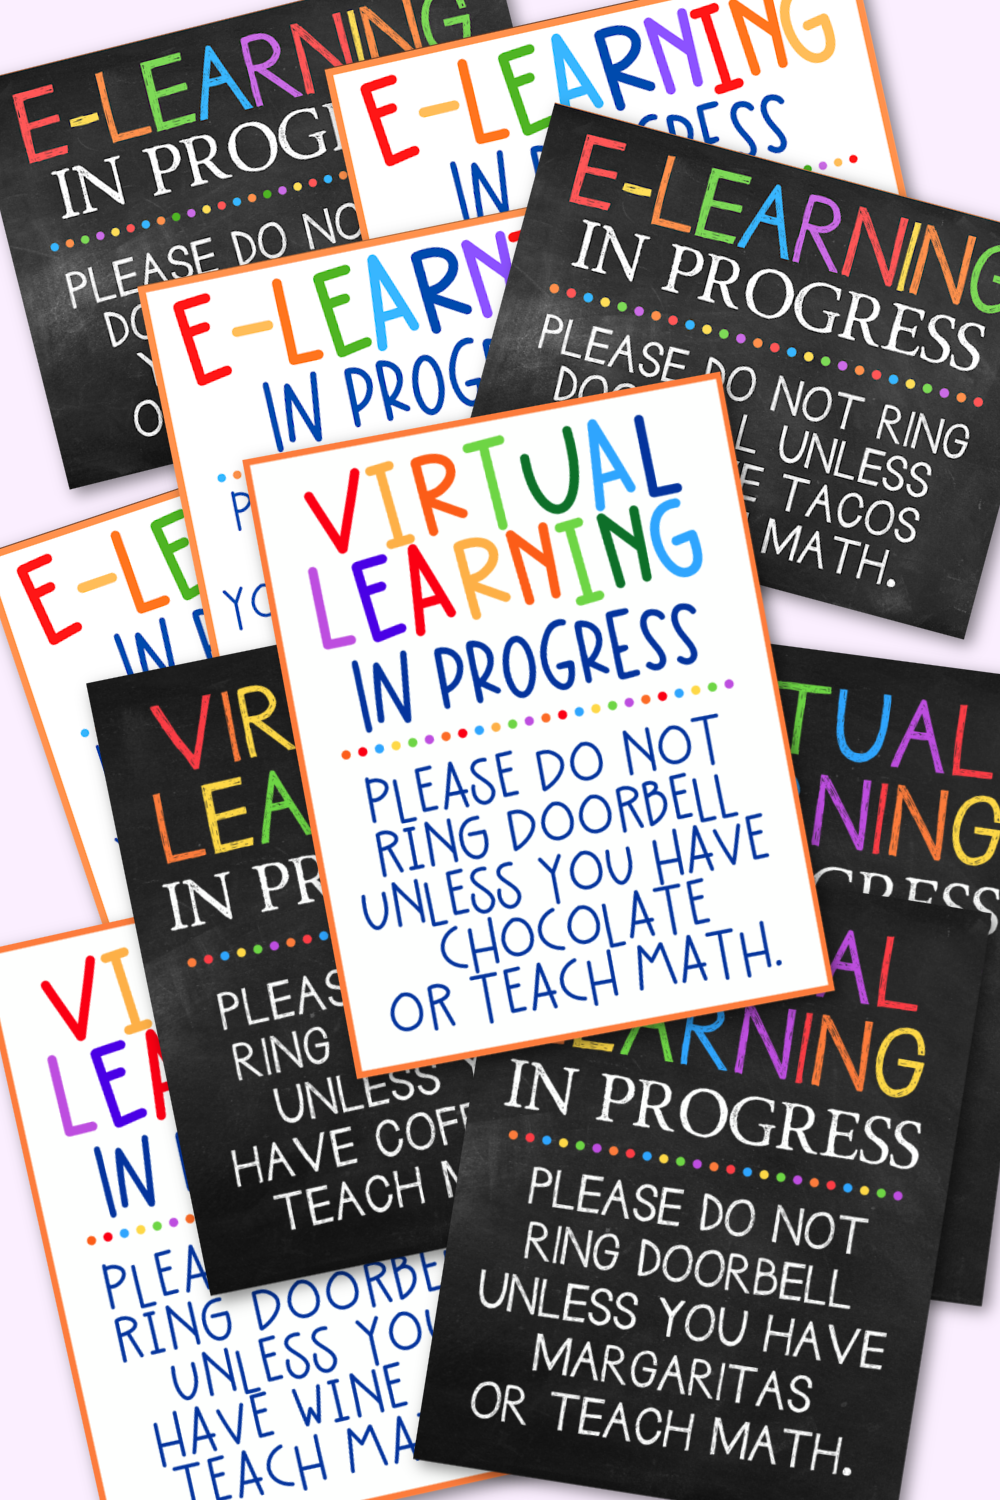 Virtual Learning In Progress – Free Printables